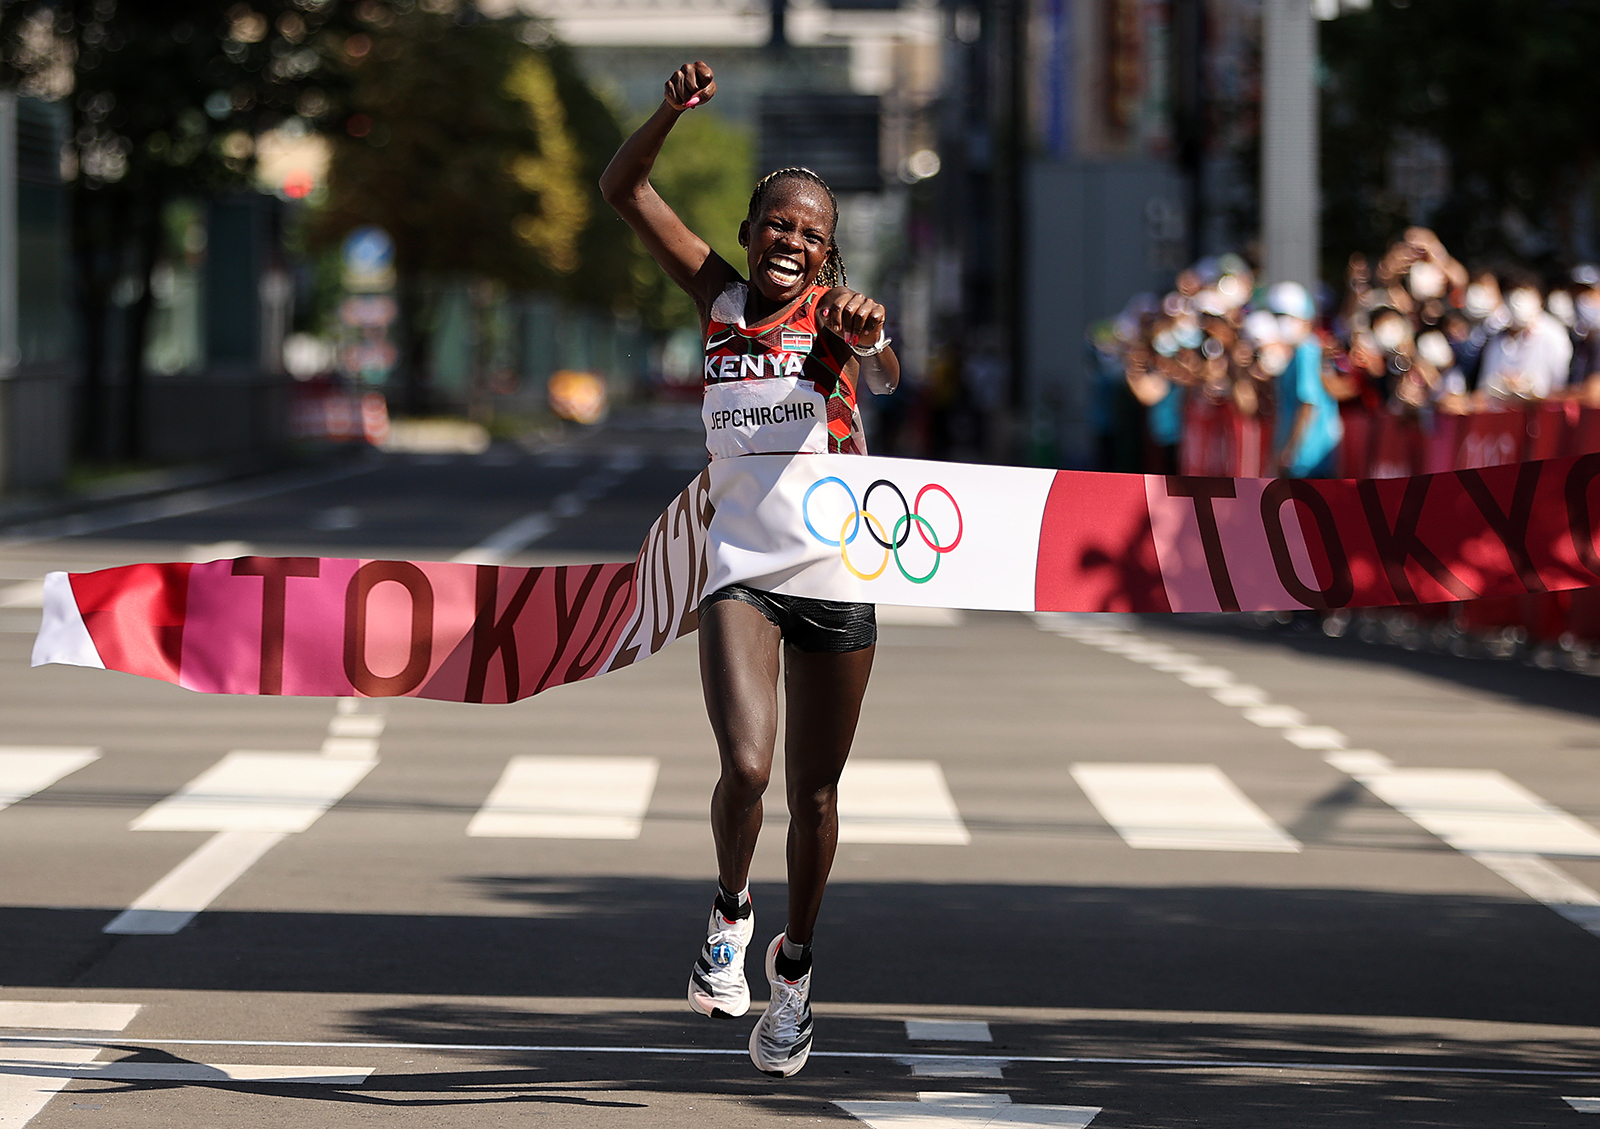 Kenya's Peres Jepchirchir celebrates as she crosses the finish line to win the gold medal in the marathon final on August 7.